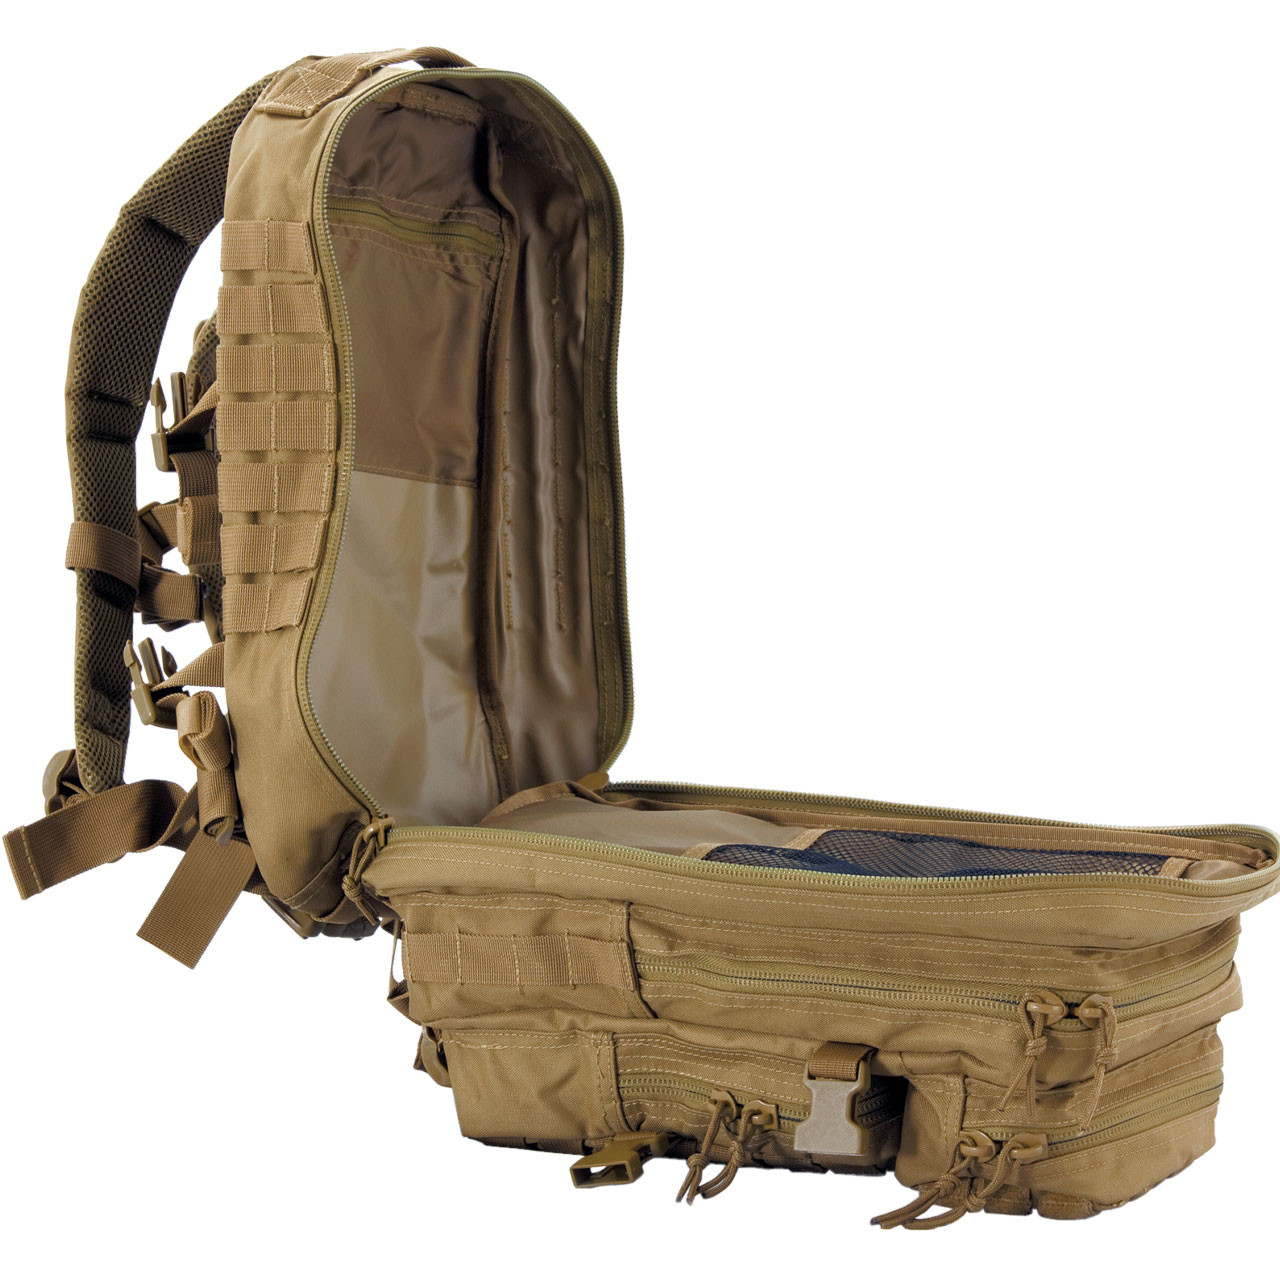 Assault Pack - Buy tactical backpacks | Military, Law Enforcement 